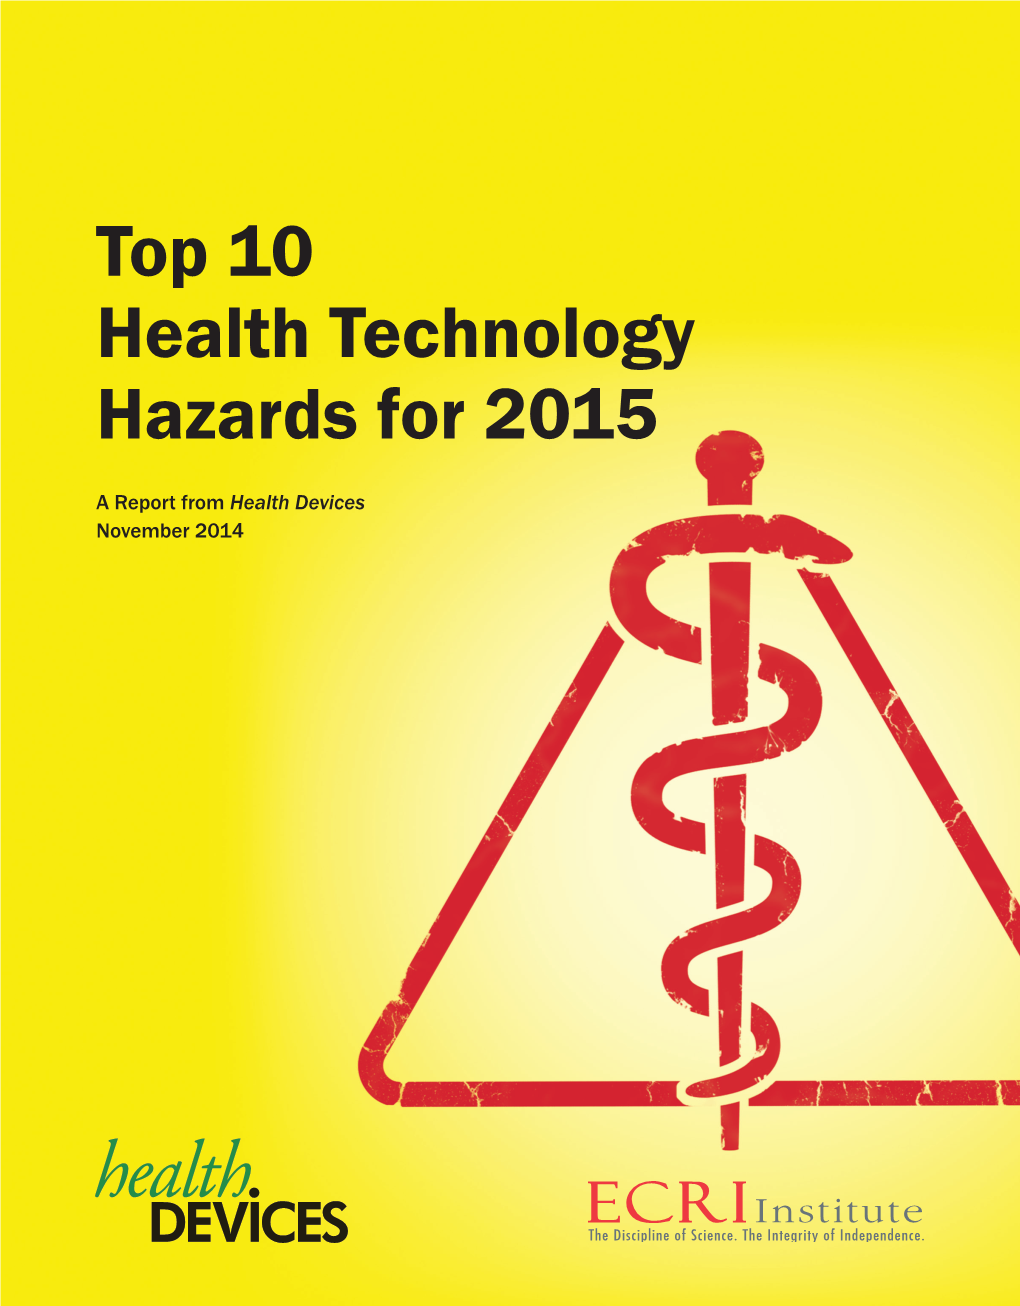 Top 10 Health Technology Hazards for 2015